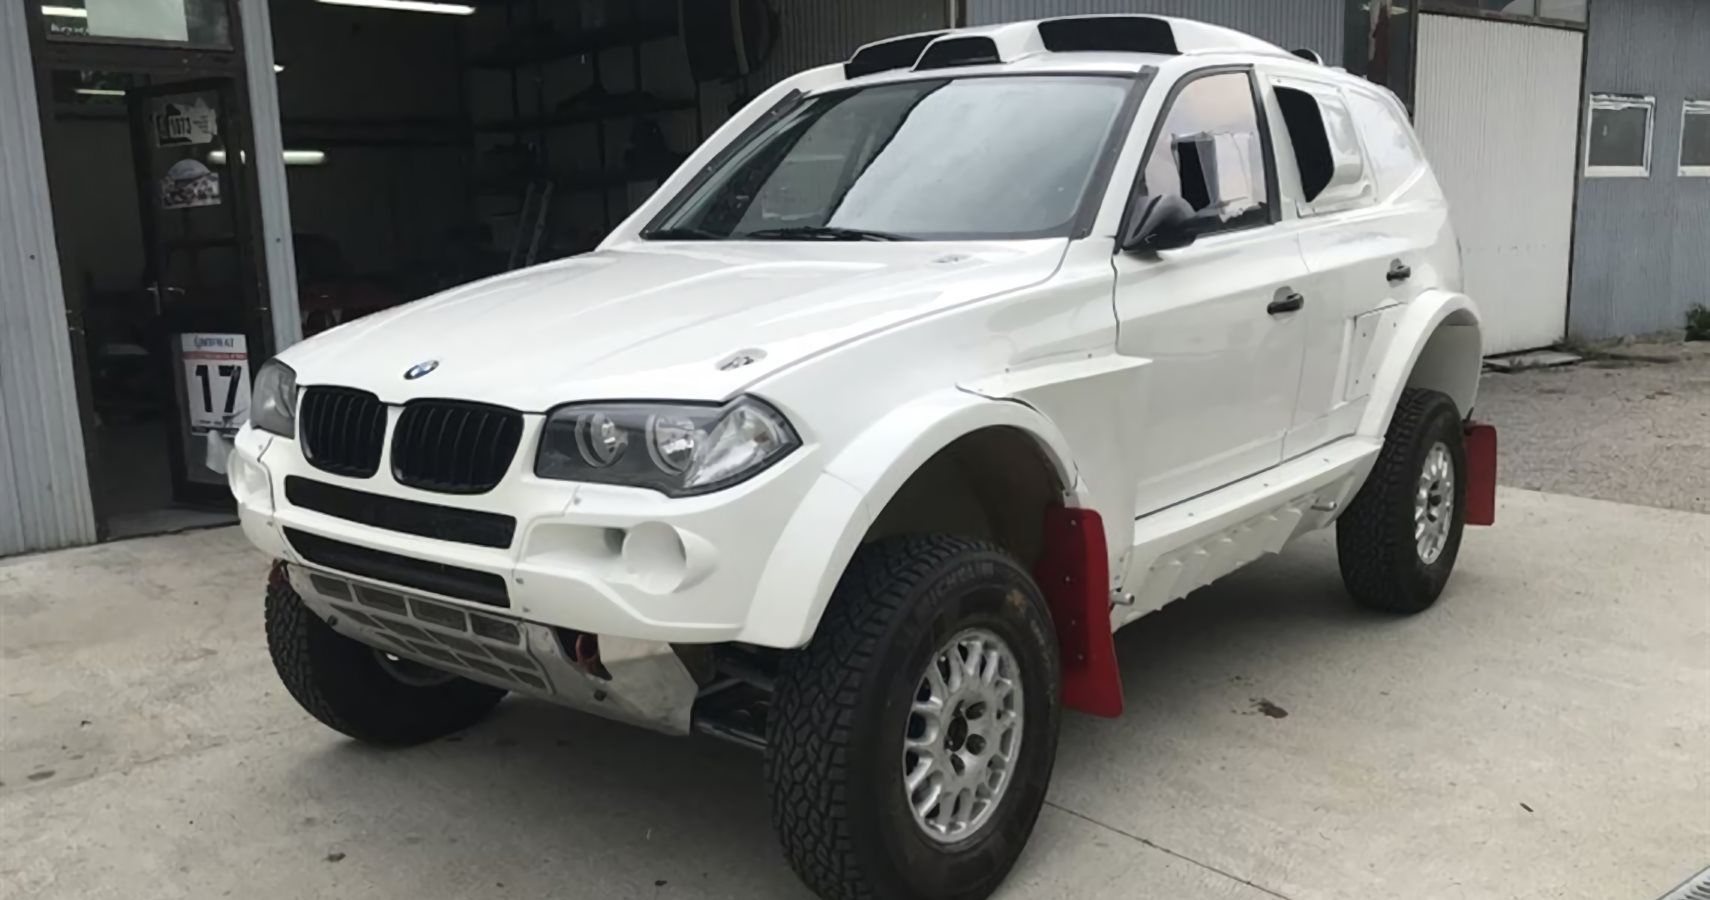 Dakar-Spec BMW X3 Cross Country Is The Ultimate Off-Roader